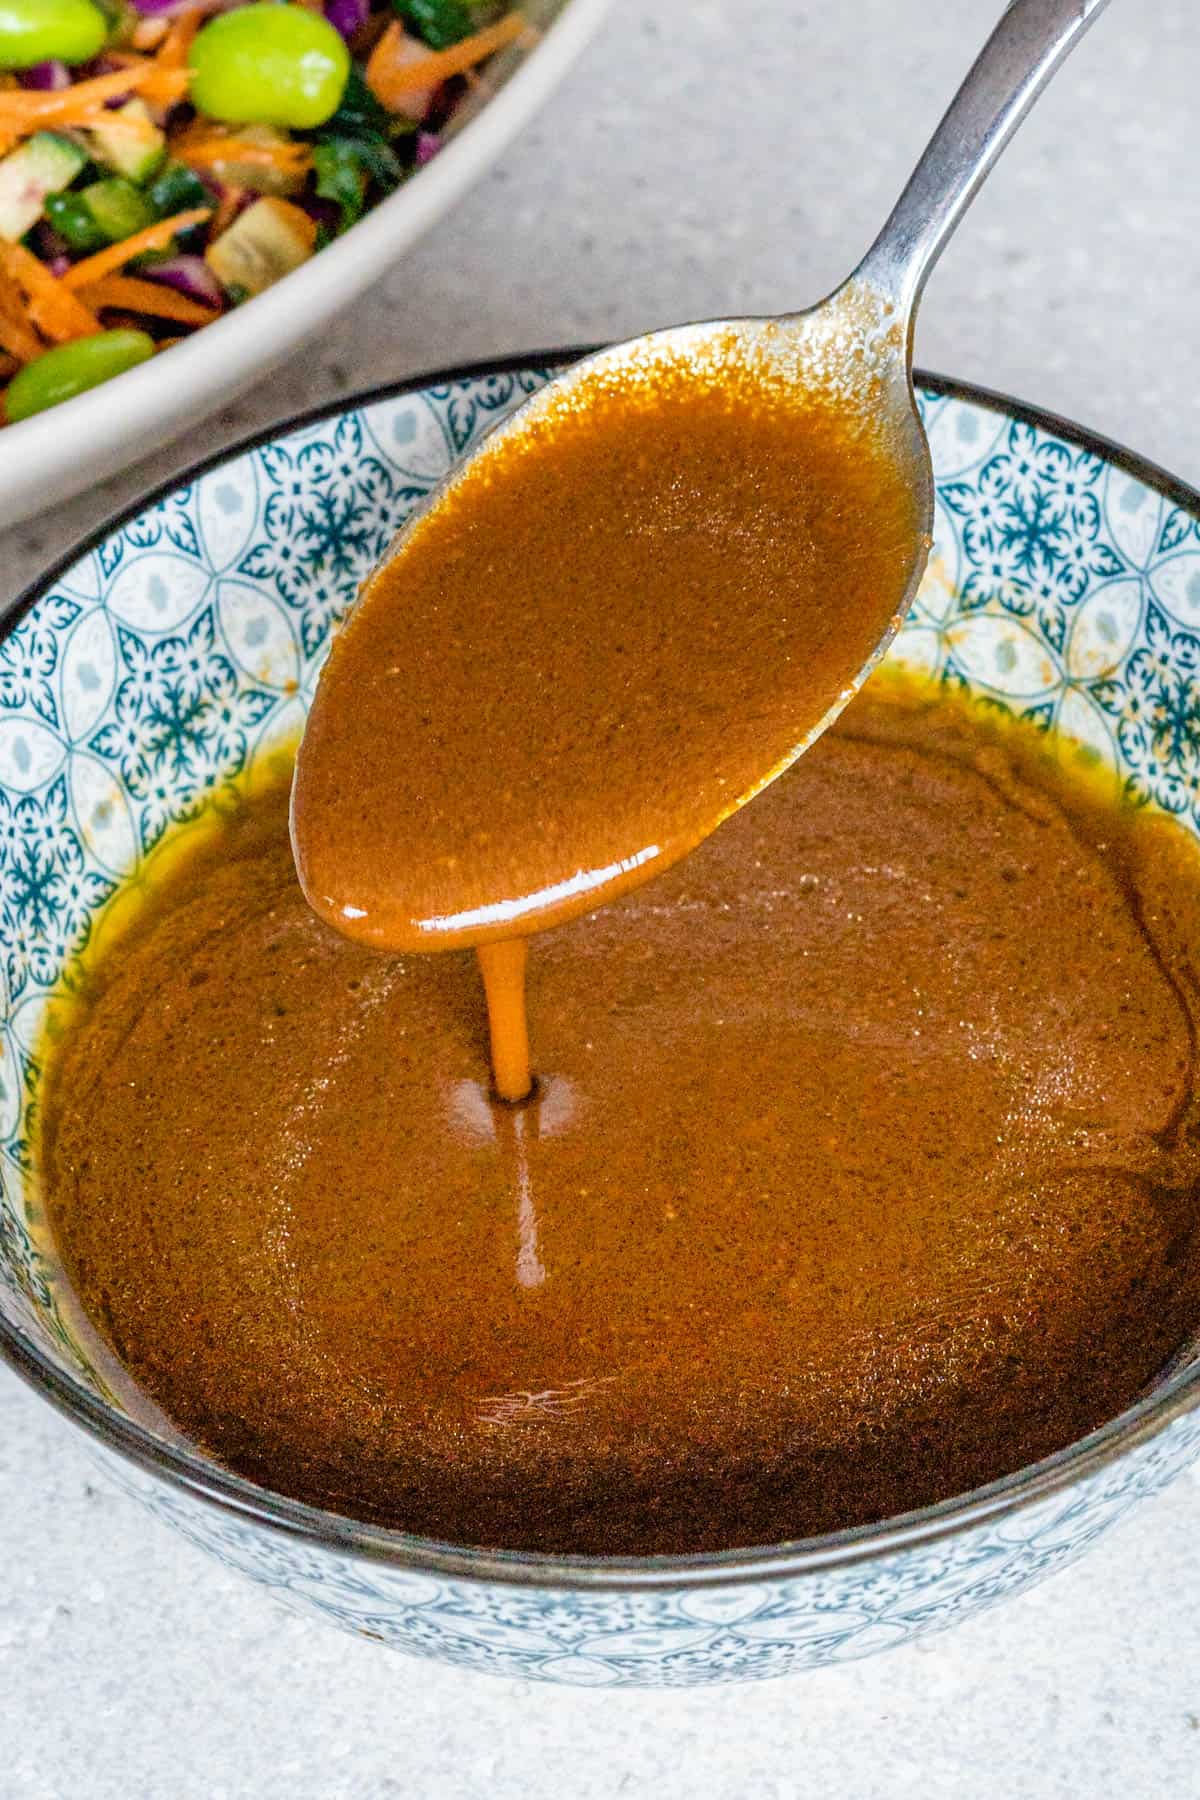 Spoon drizzle of miso dressing